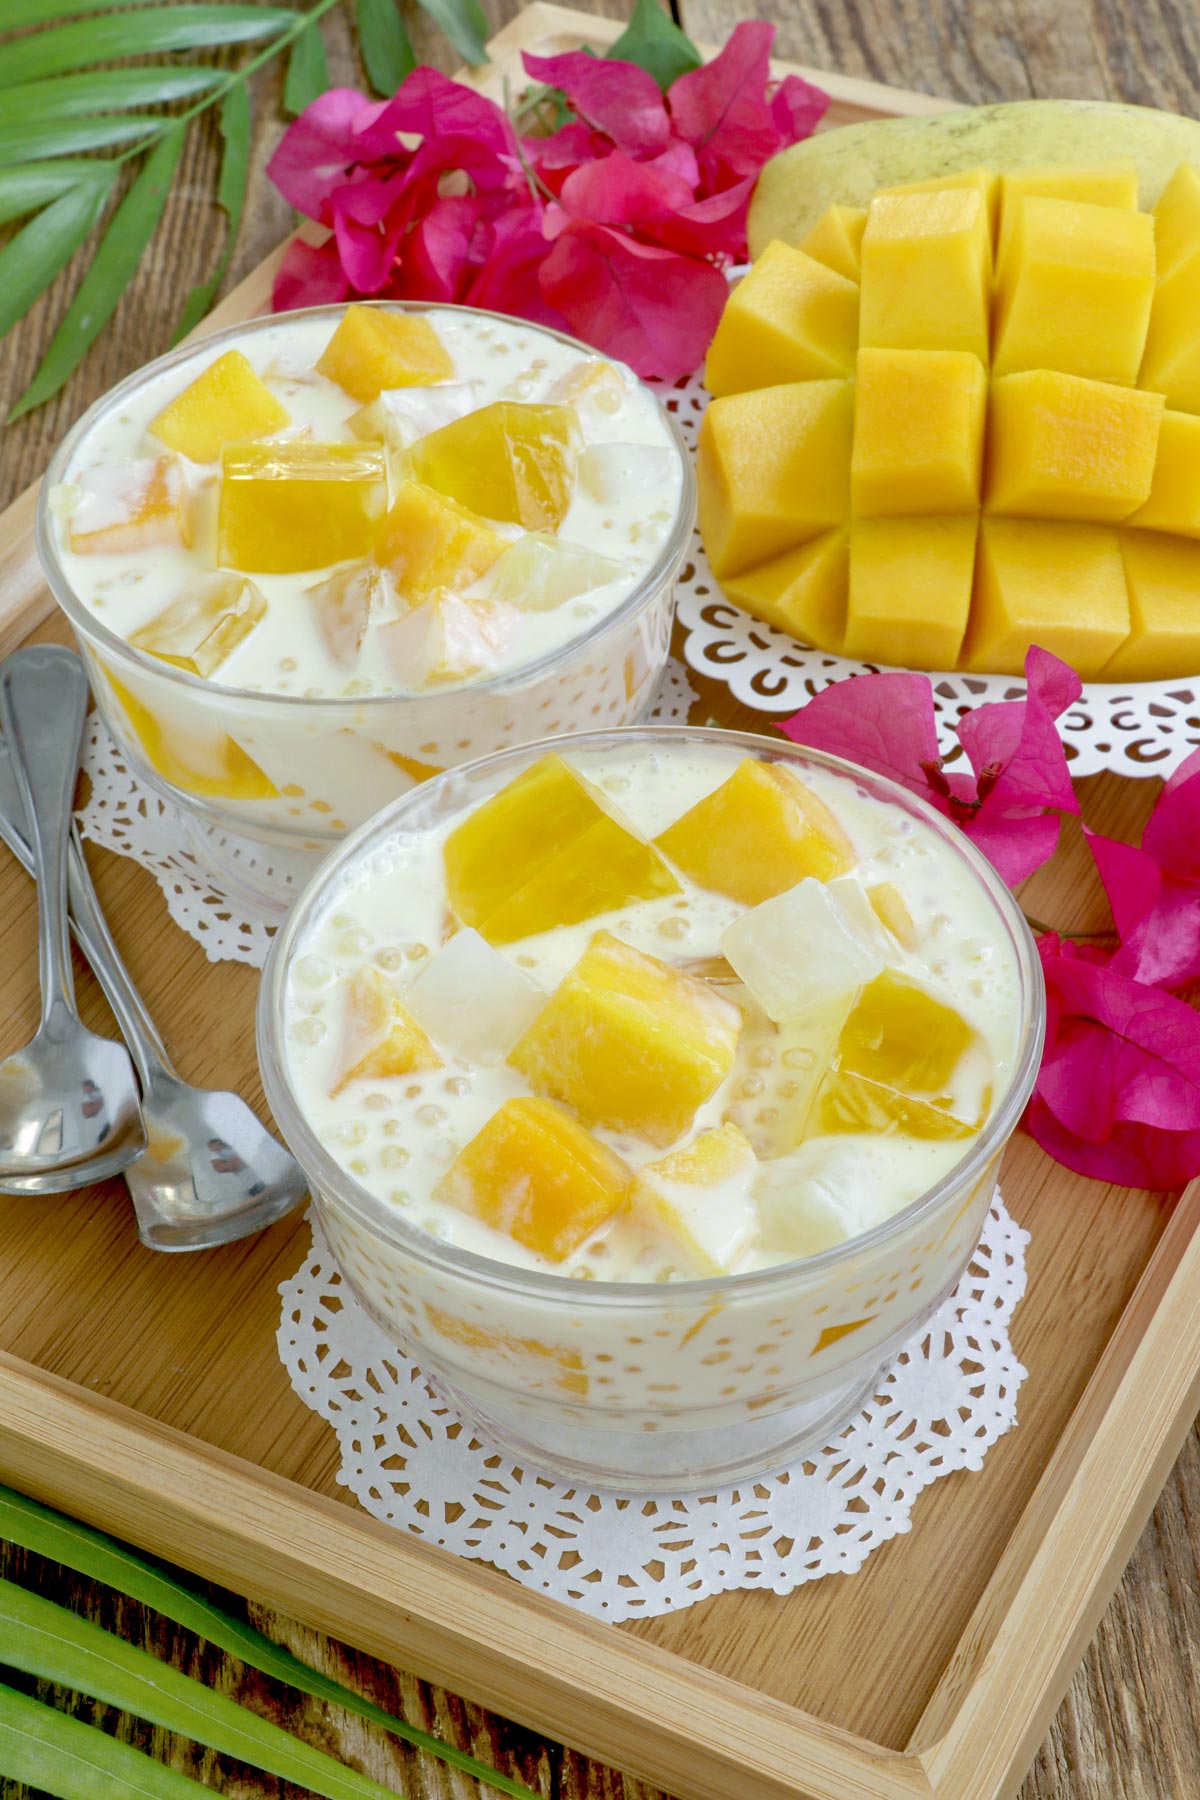 Creamy Mango Jelly with juicy and sweet mango cubes, mango-flavored jelly, nata de coco and mini tapioca pearls.